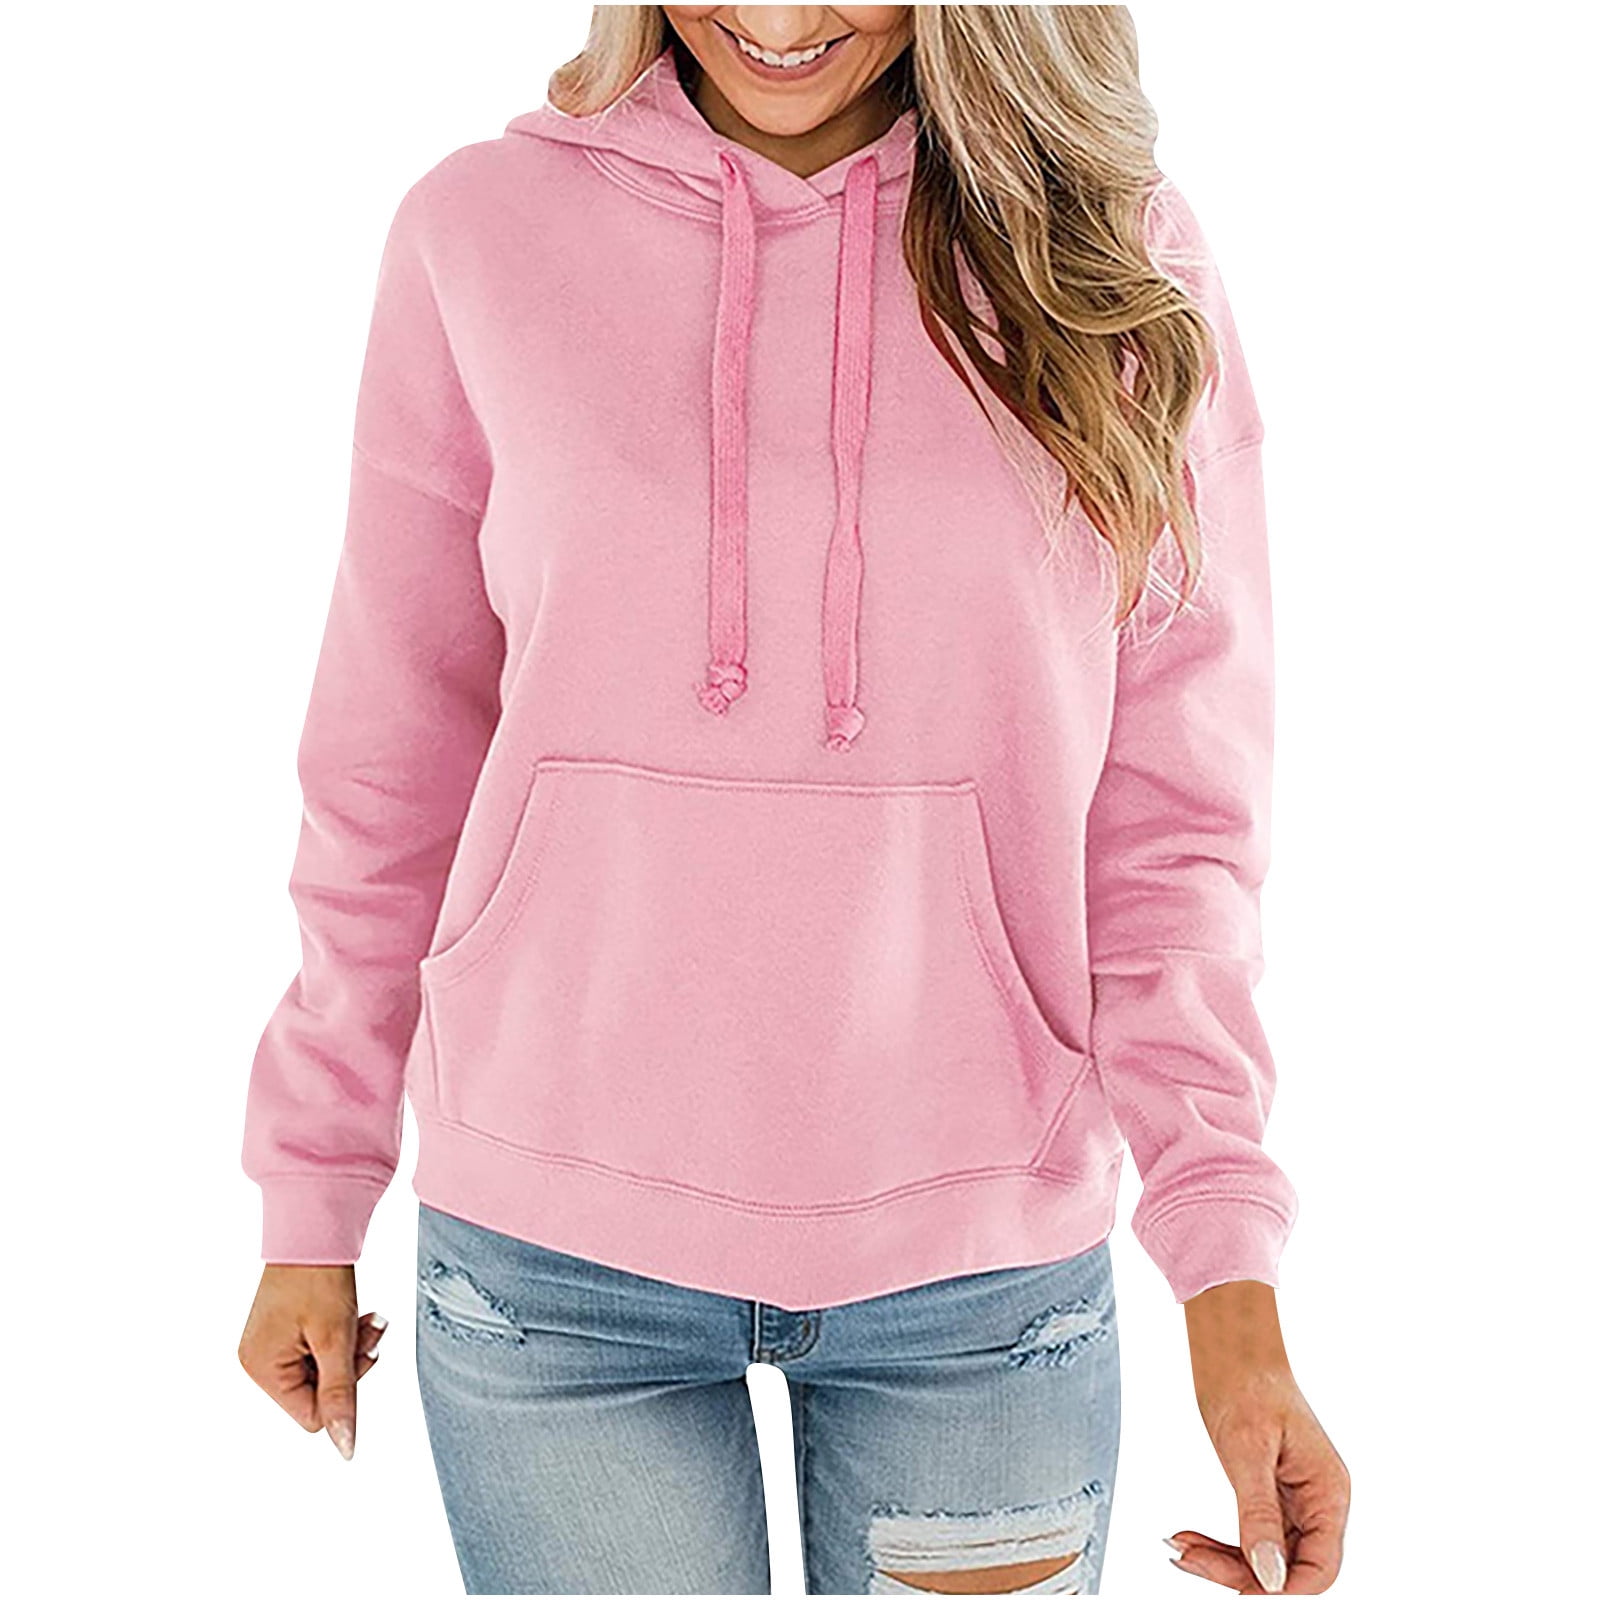 Yyeselk Women's Casual Long Sleeve Top,Fashion Holiday Christmas Fall  V-Neck Pullover Zip Up Long Sleeve for Tee Shirt Pink at  Women's  Clothing store